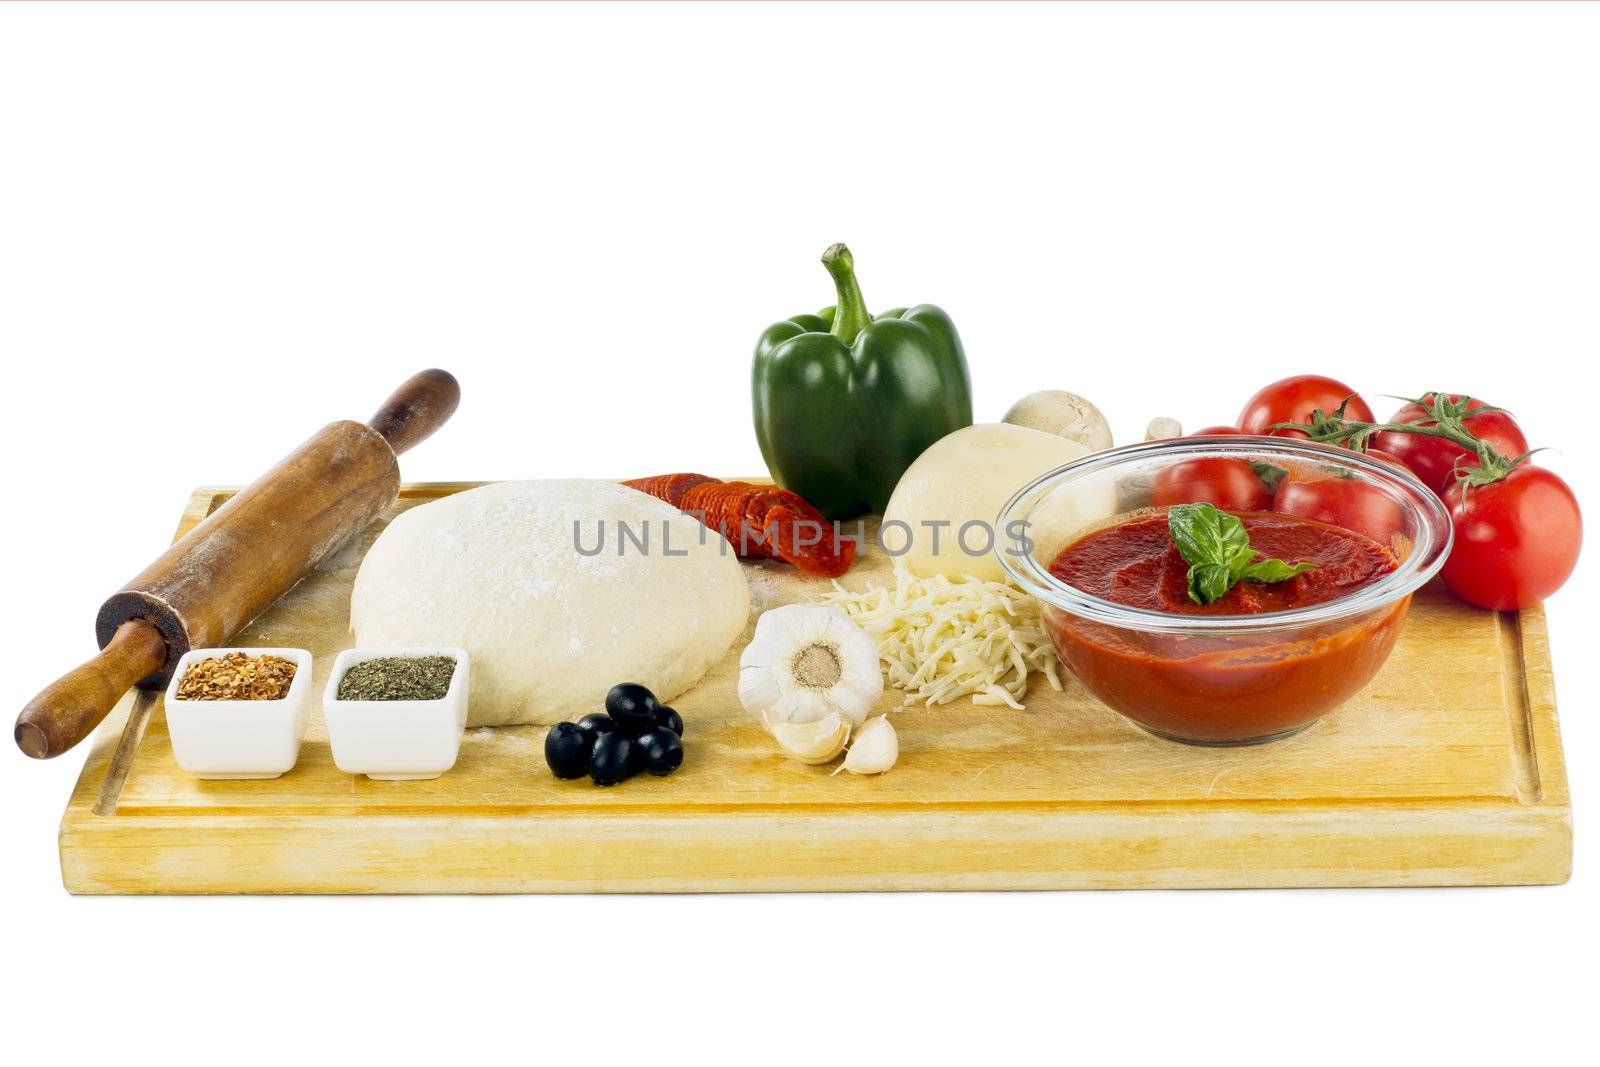 complete set of ingredients for home made pizza by kozzi